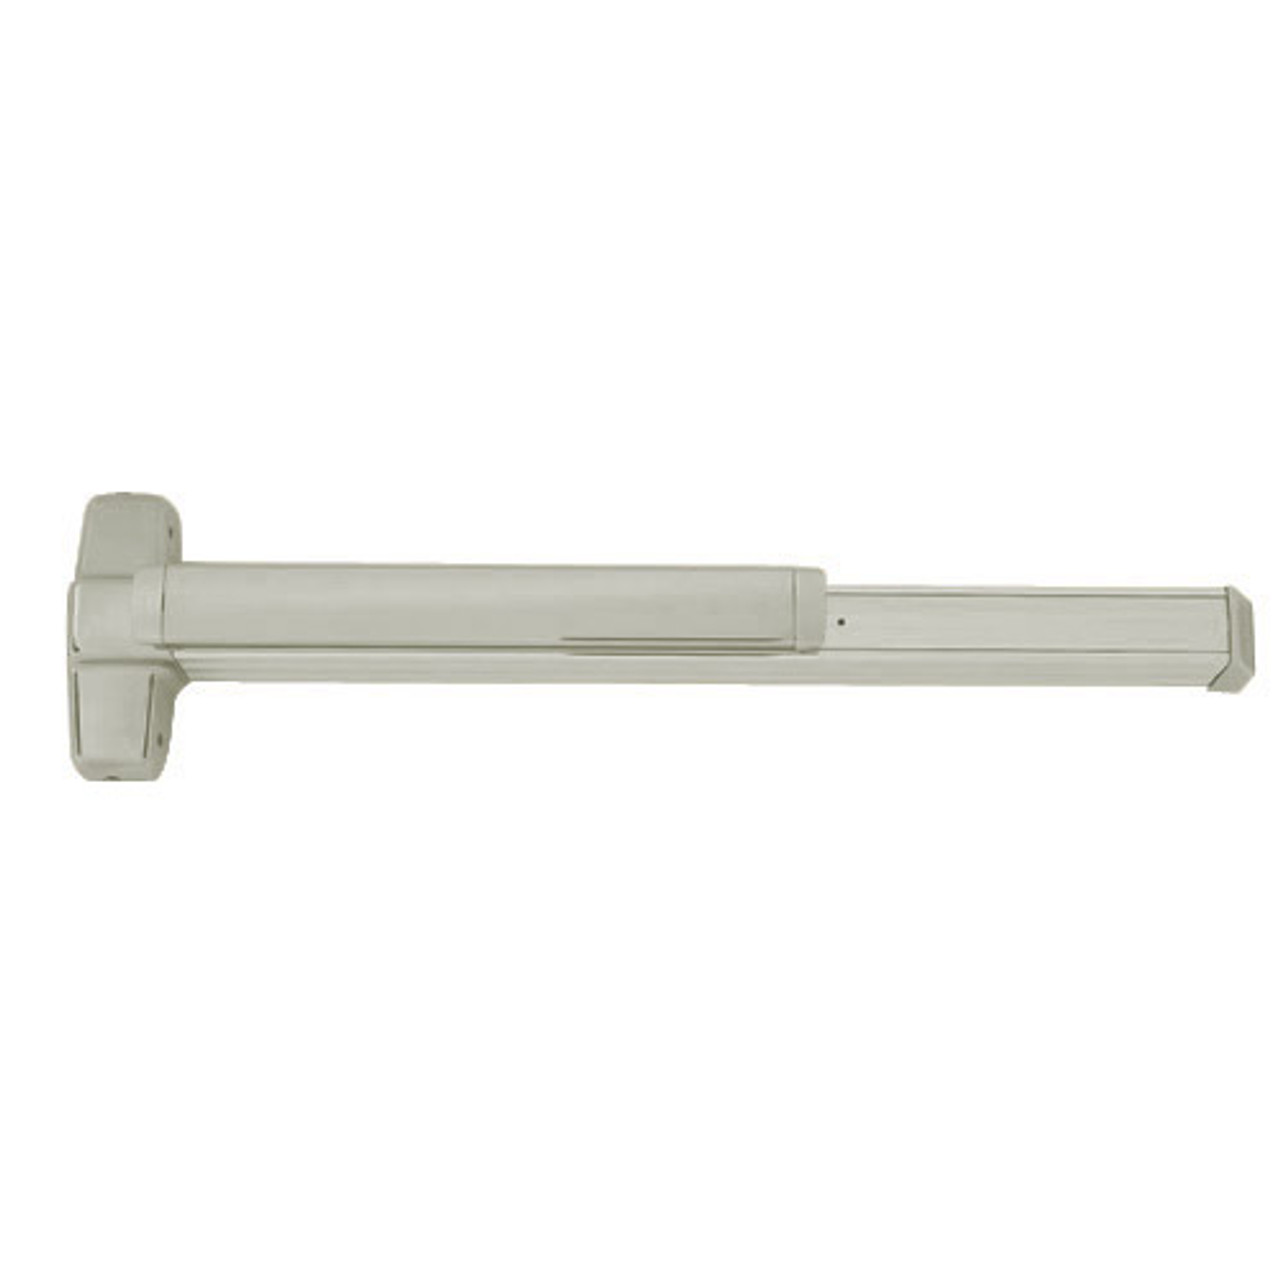 CD9847WDC-EO-US26-3 Von Duprin Exit Device with Cylinder Dogging in Bright Chrome